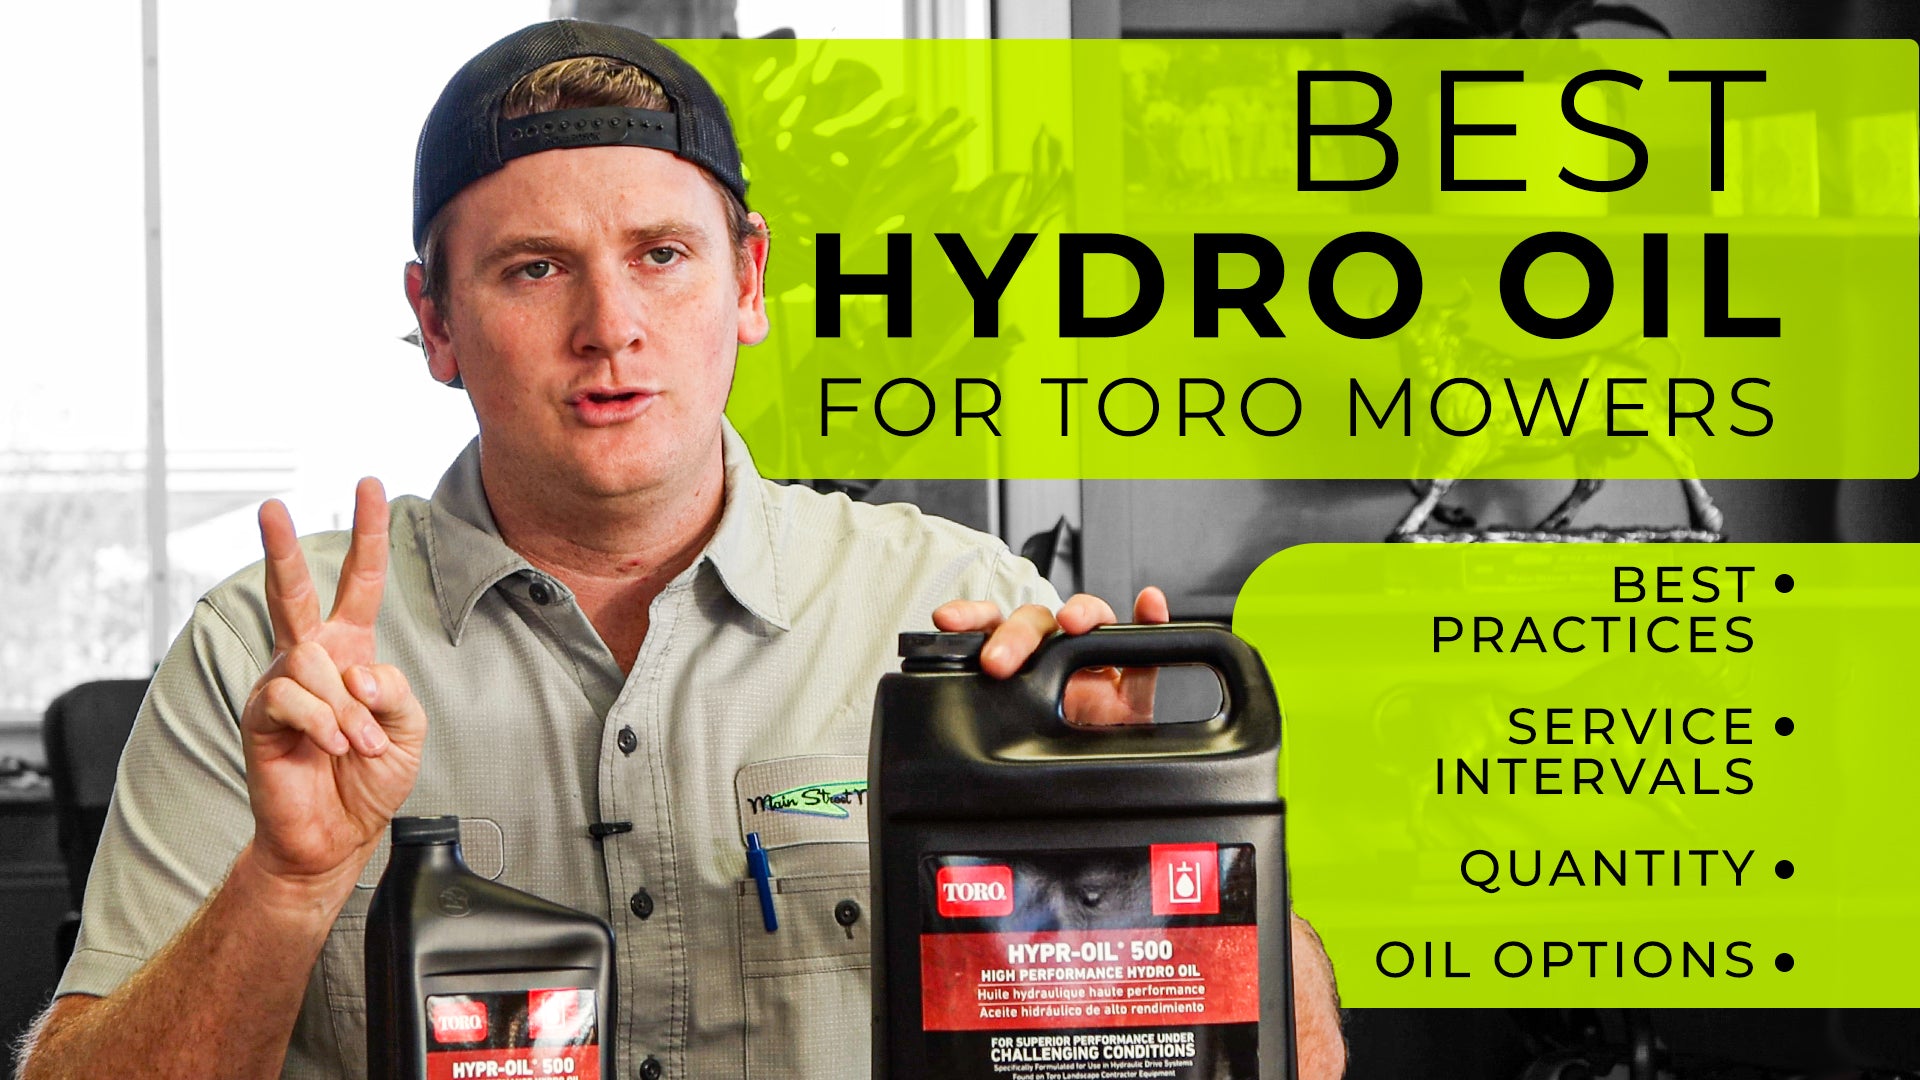 HYDRO OIL Guide for TORO Mowers | Process, Products, Quantity, & Servi